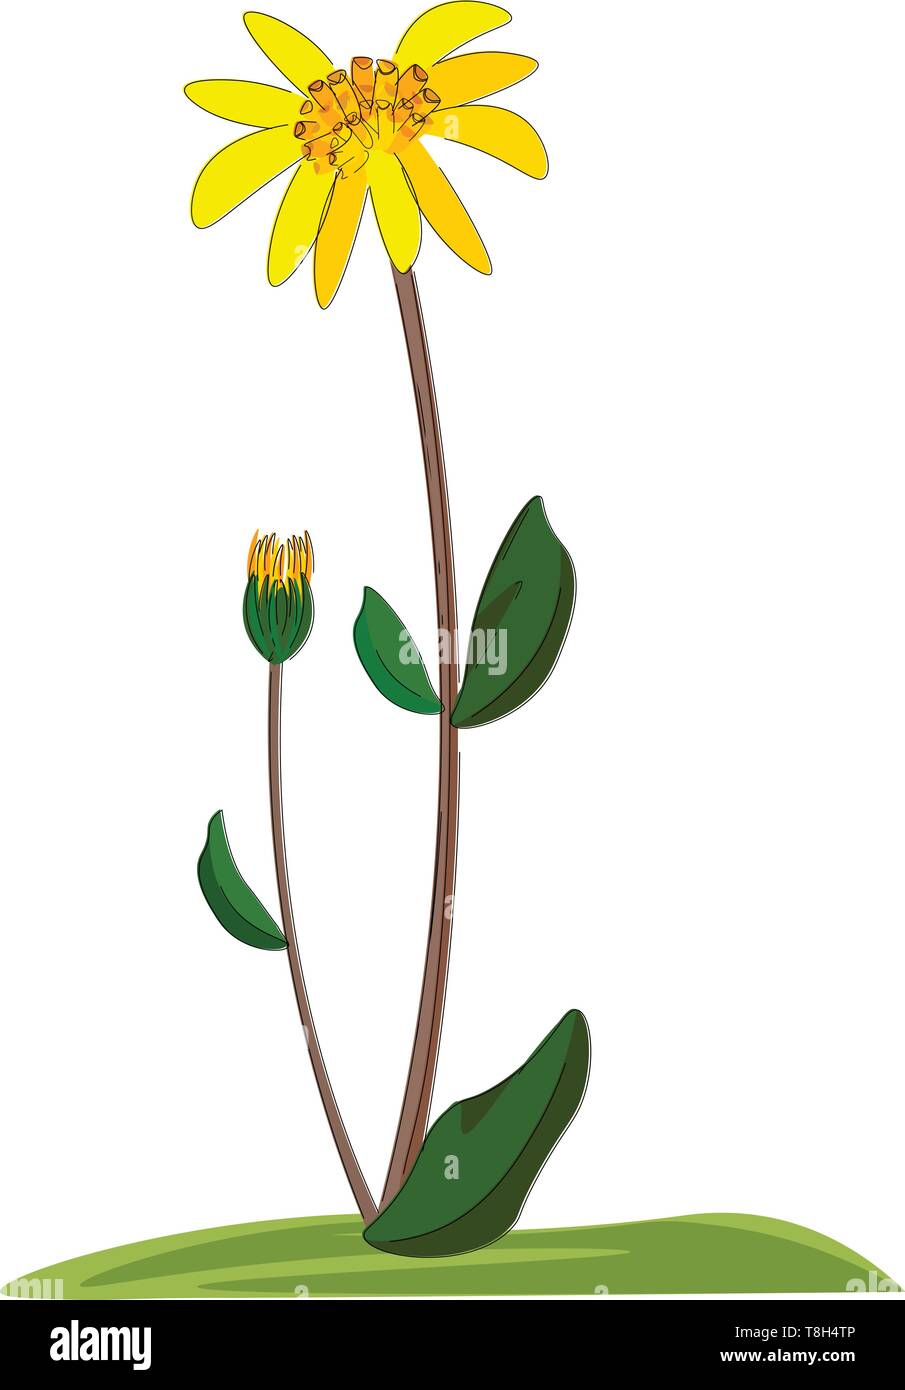 Twig With Small Green Leaves Vector Illustration Of Plant Drawing Of  Branchlet With Shadow Stock Illustration - Download Image Now - iStock